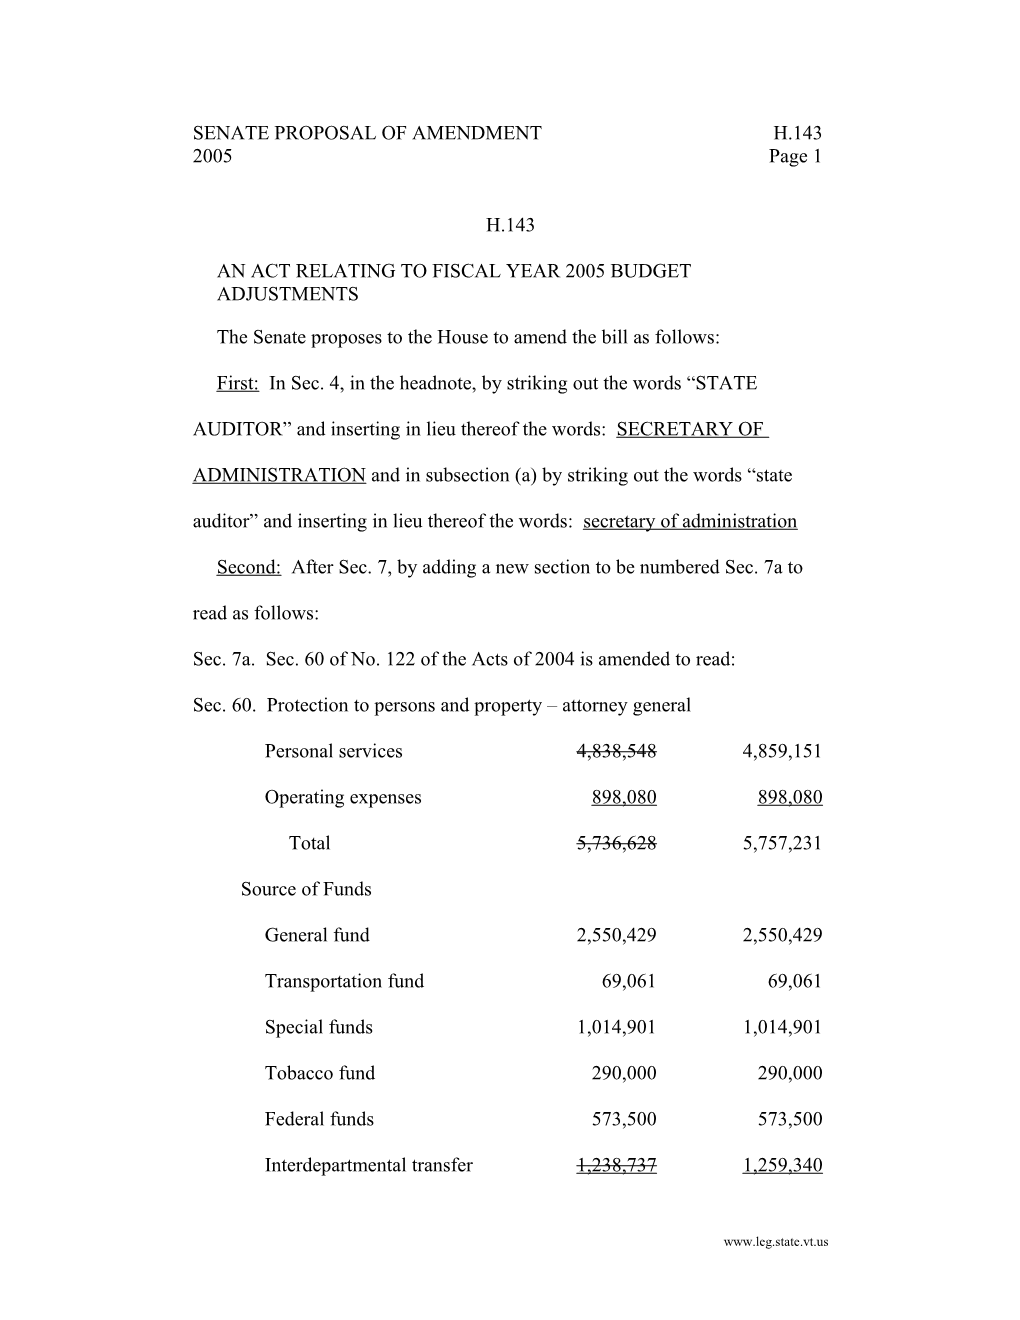 An Act Relating to Fiscal Year 2005 Budget Adjustments